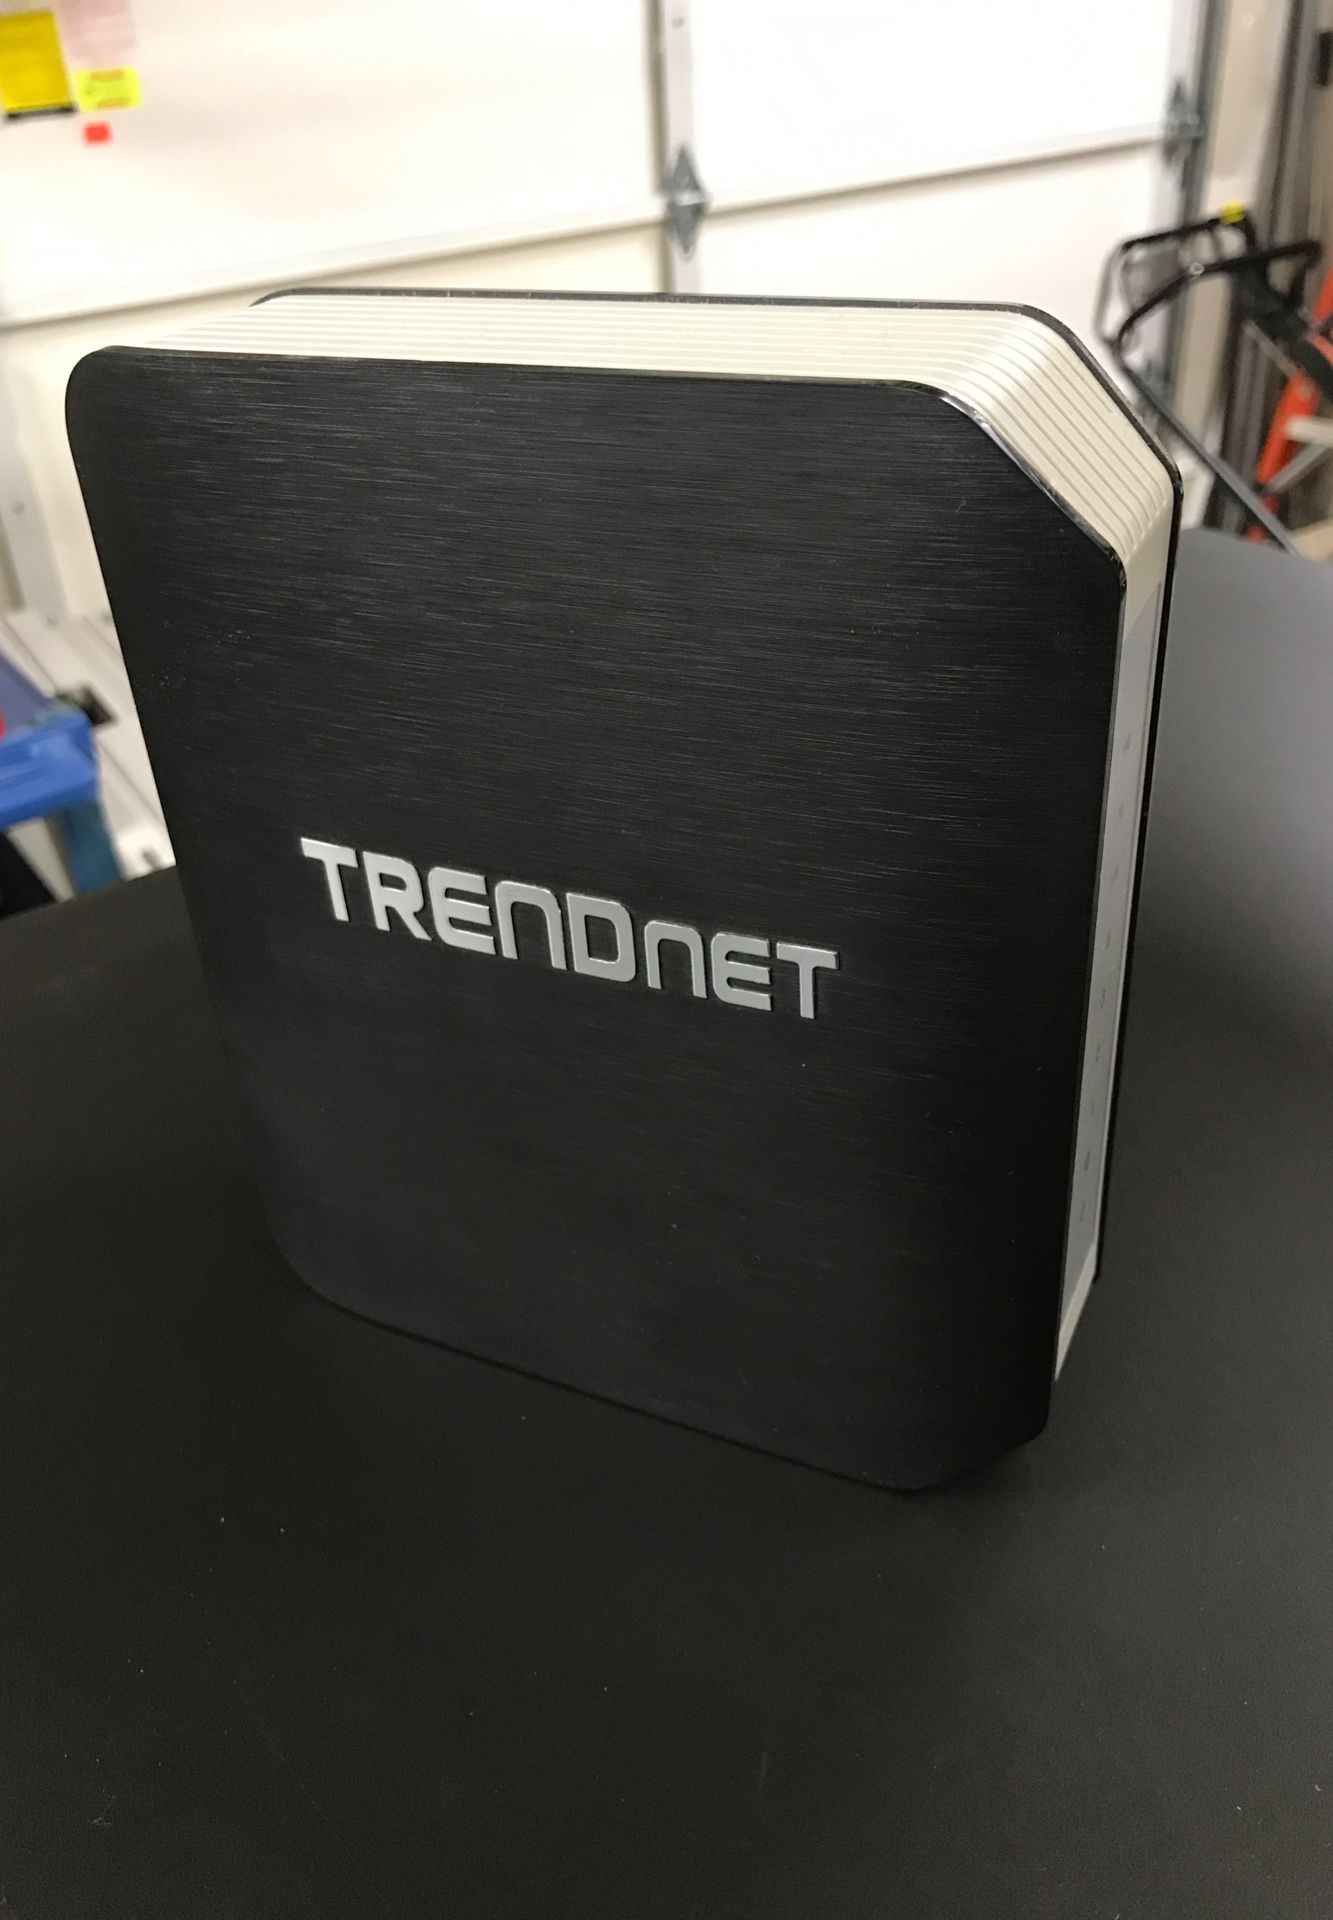 Trendnet AC1750 Dual Band Router